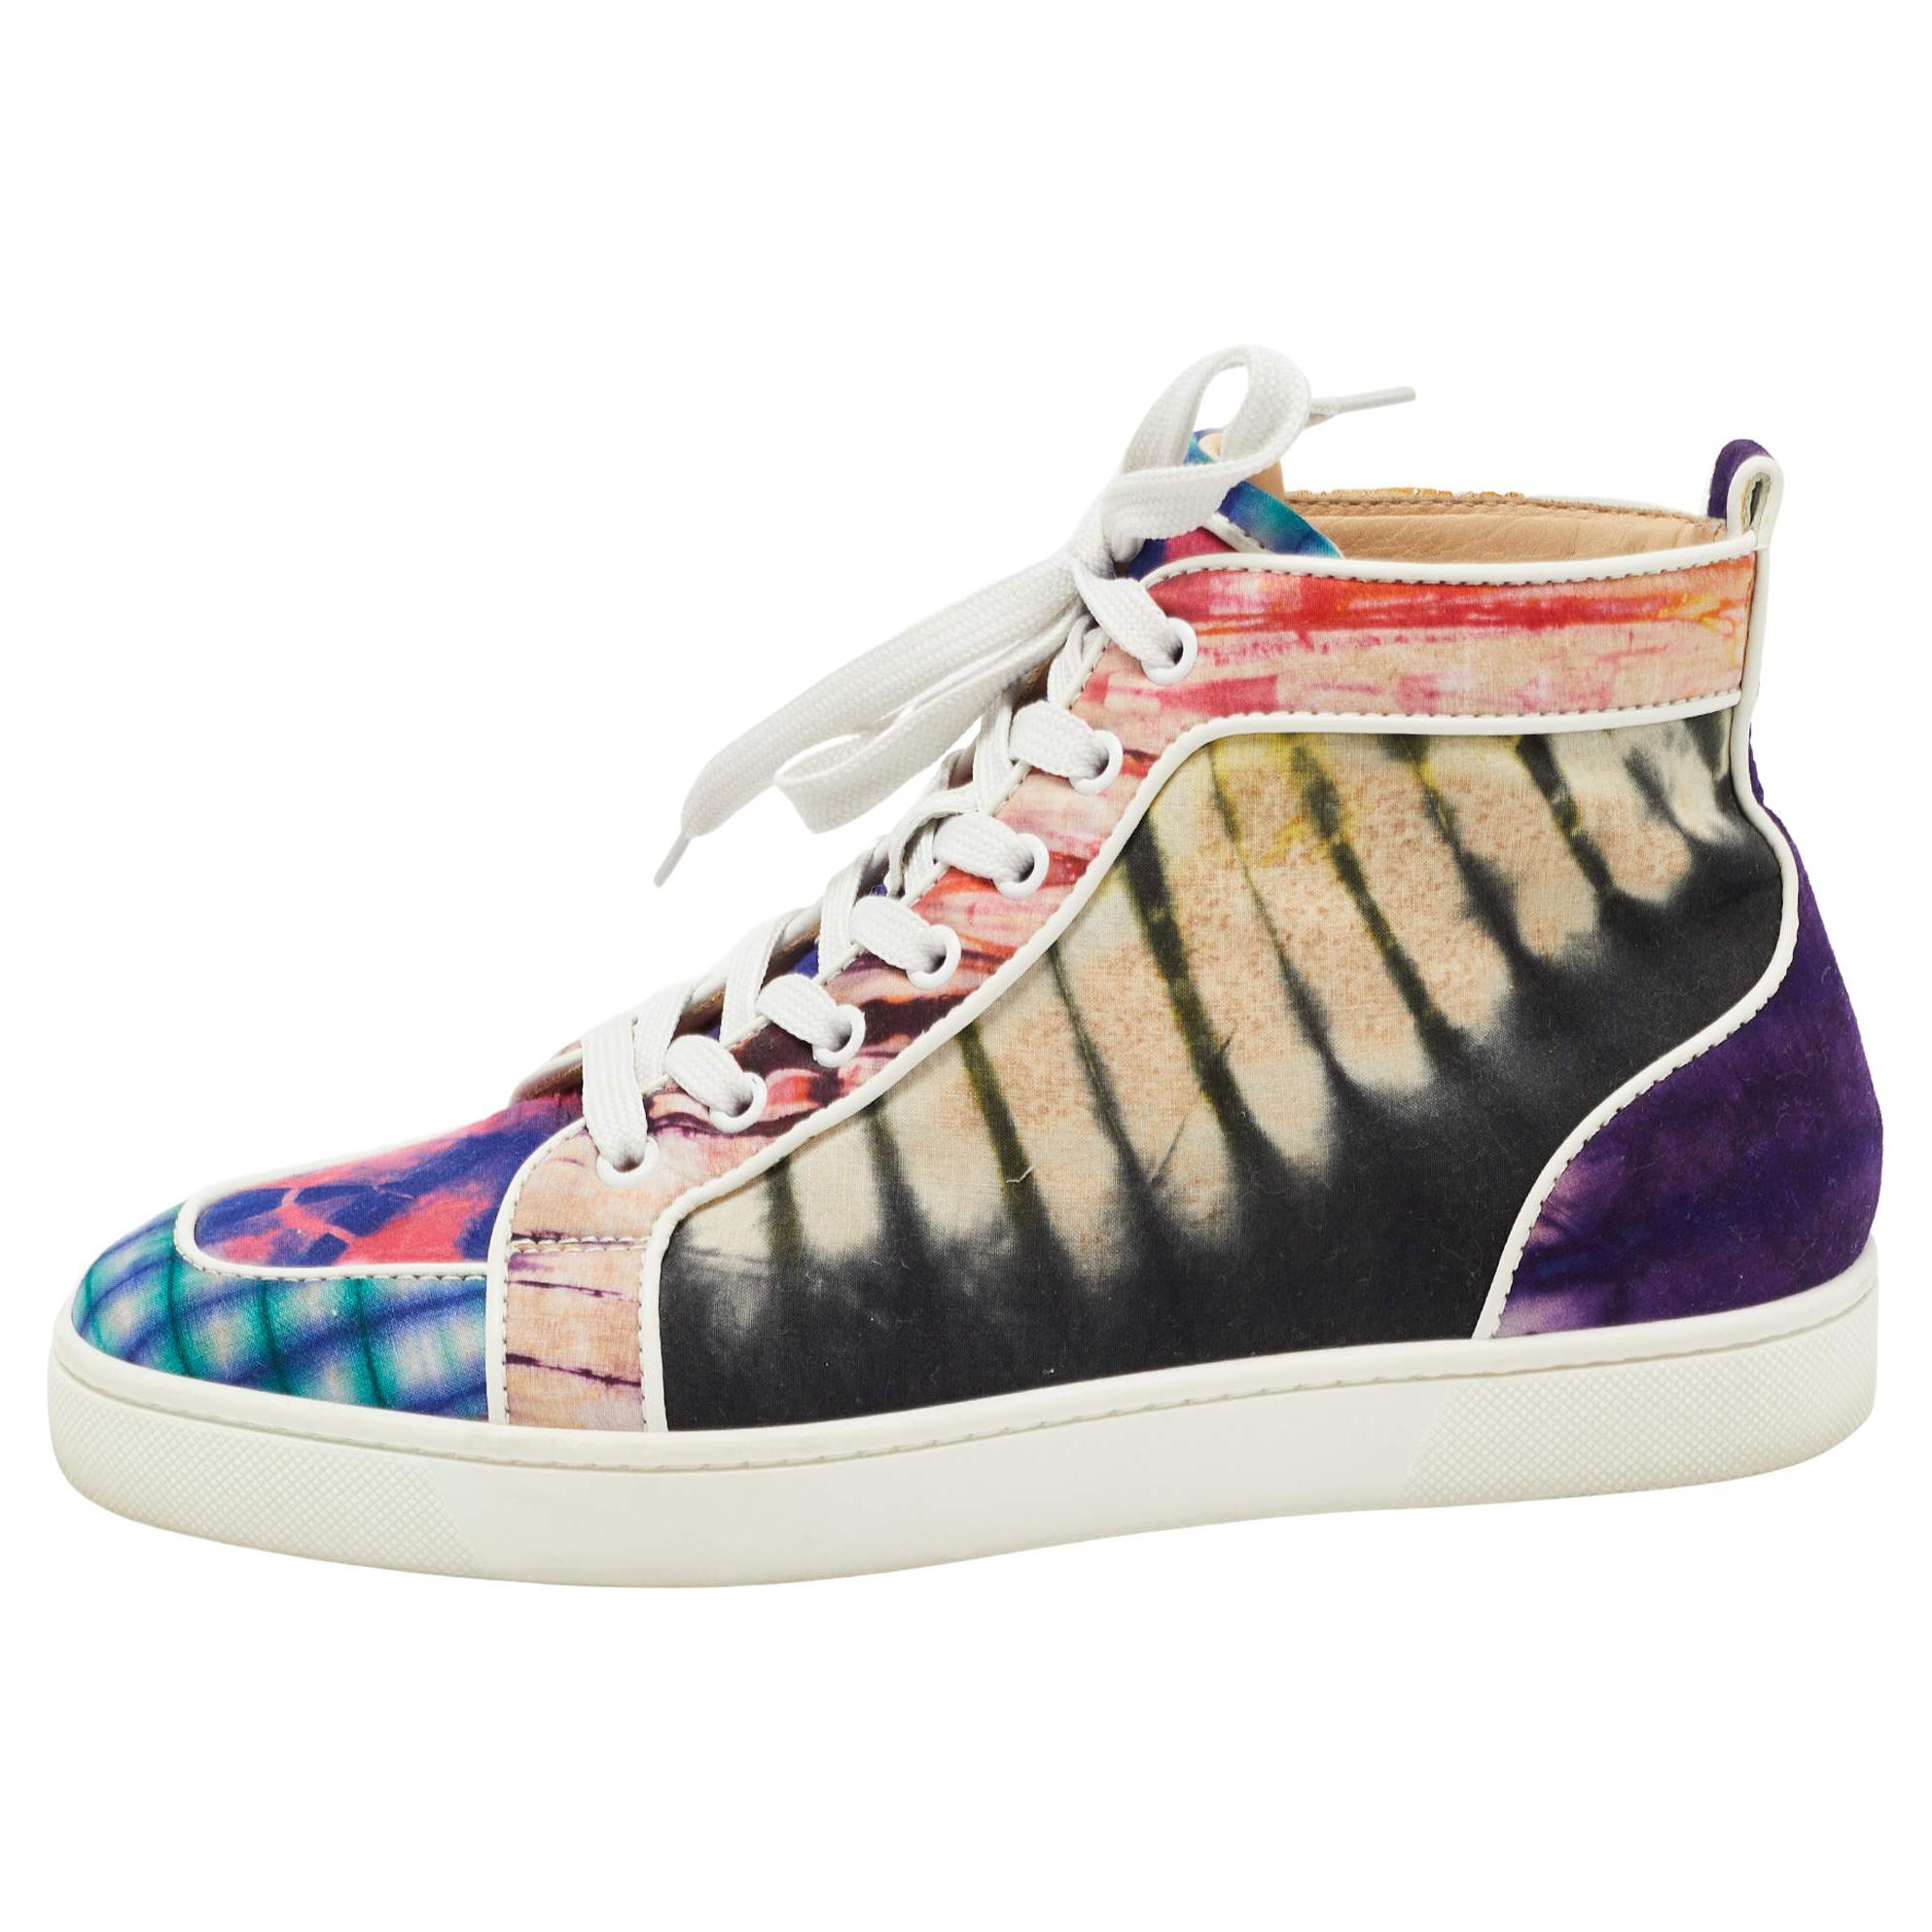 Christian Louboutin Multicolor Fabric Tie Dye High Top Sneakers Size 39.5 For Sale